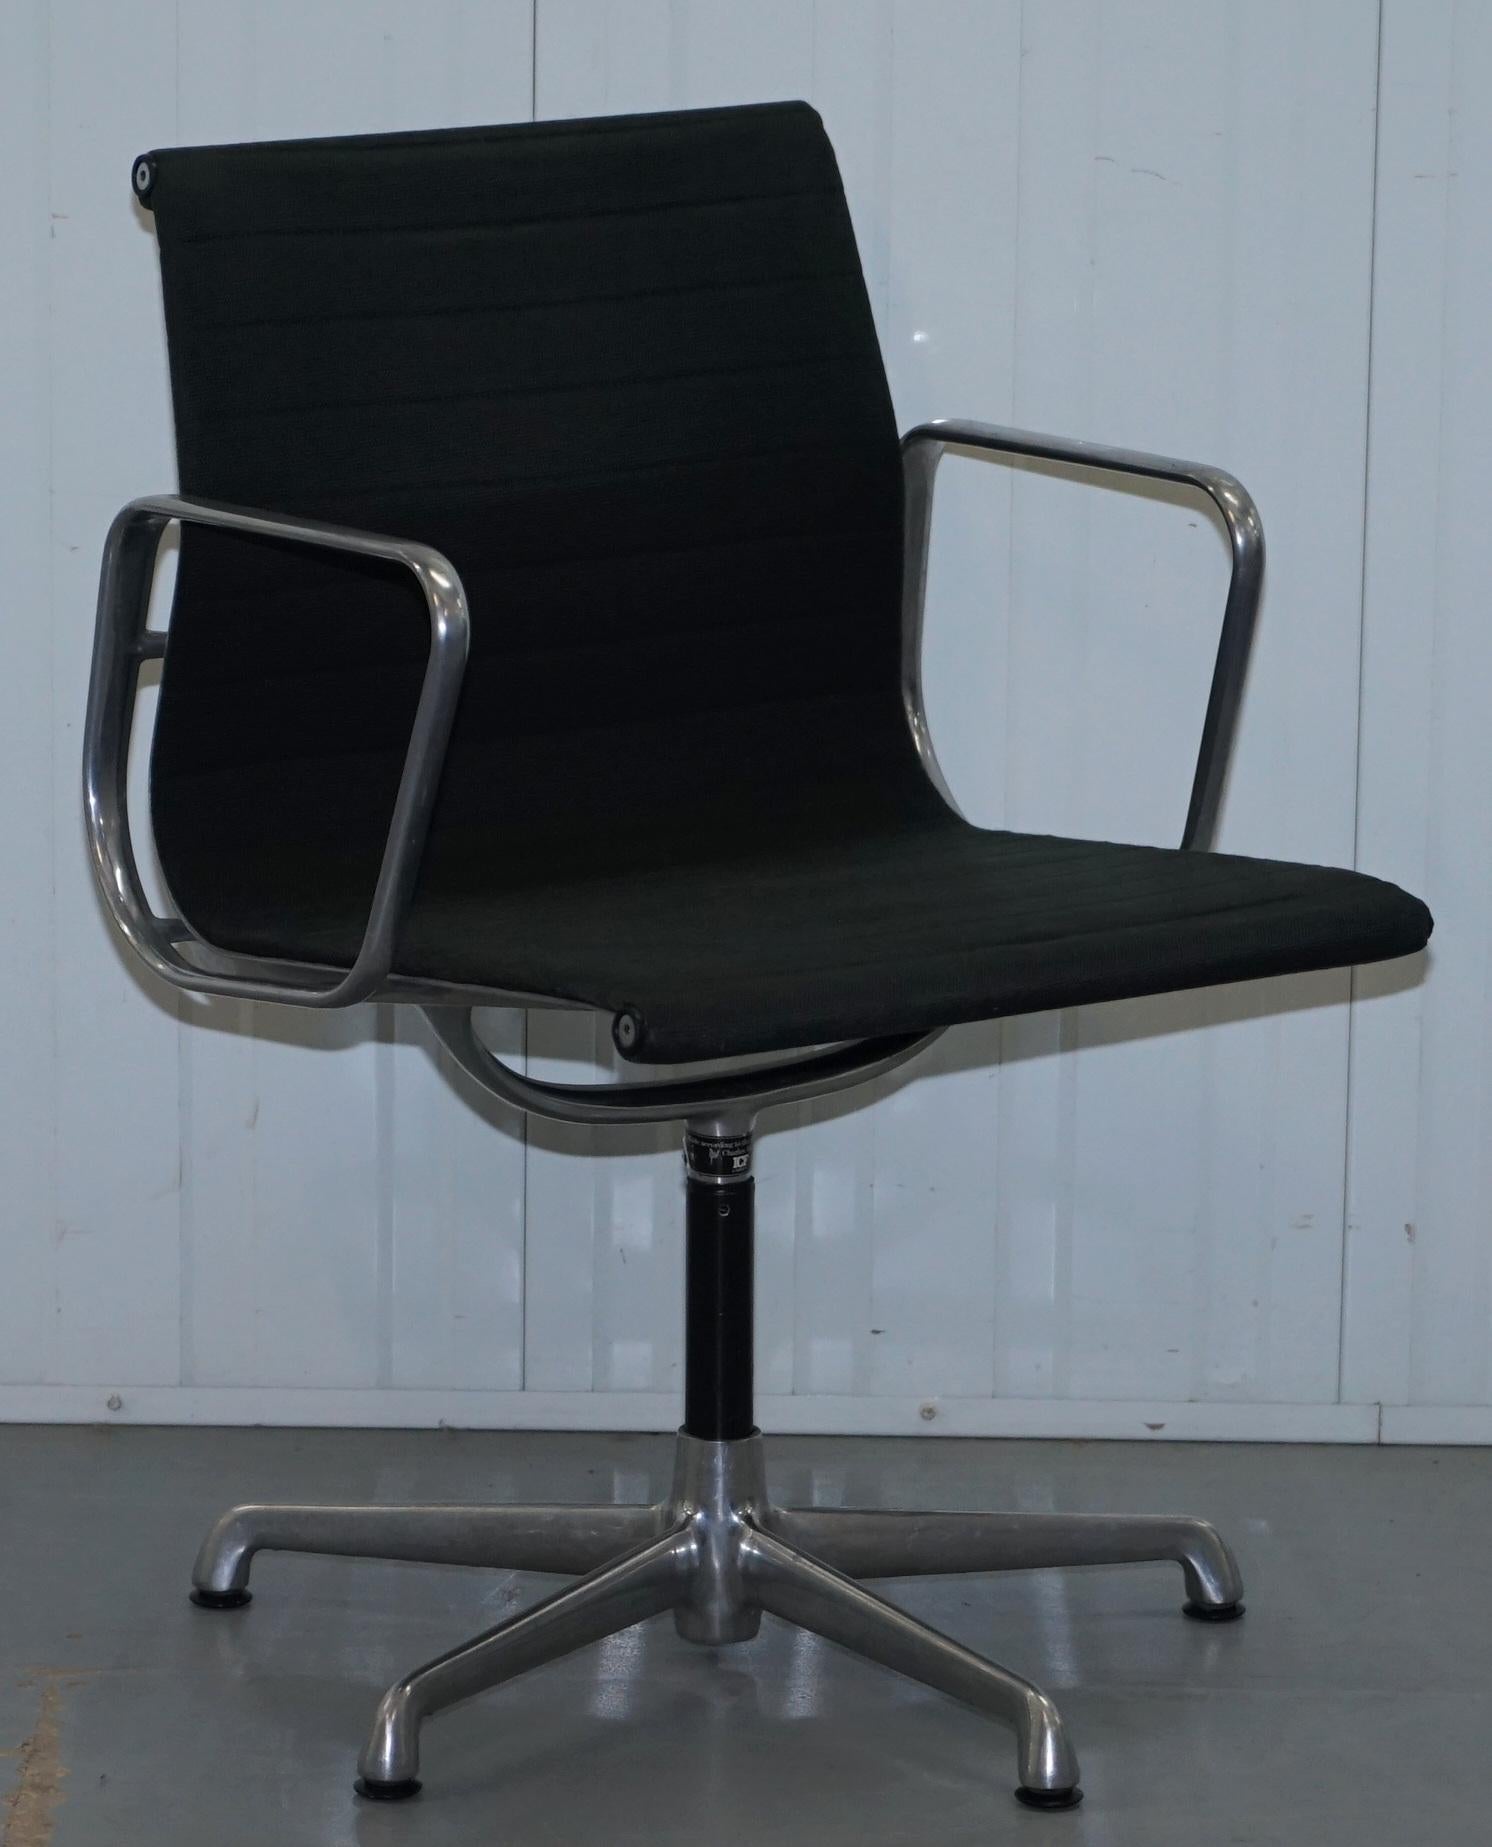 We are delighted to offer for sale 1 of 2 original vintage ICF Eames EA117 office swivel armchairs

The auction is for one with the option to buy two

One of the most iconic designs of the 2oth century, made by Charles and Ray Eames, distributed